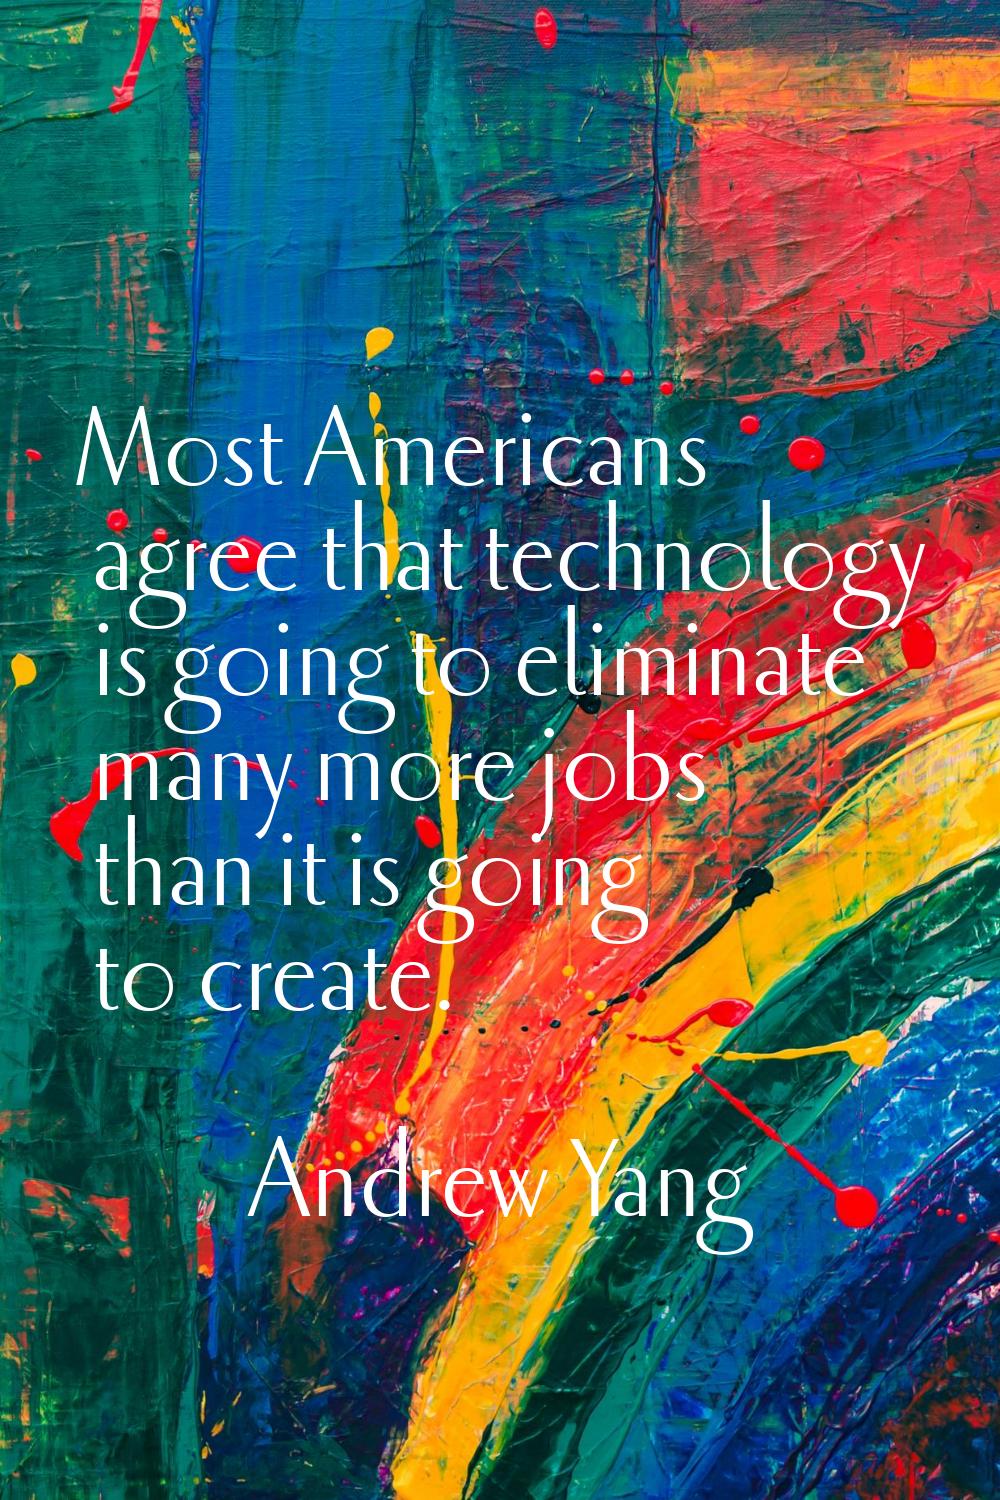 Most Americans agree that technology is going to eliminate many more jobs than it is going to creat